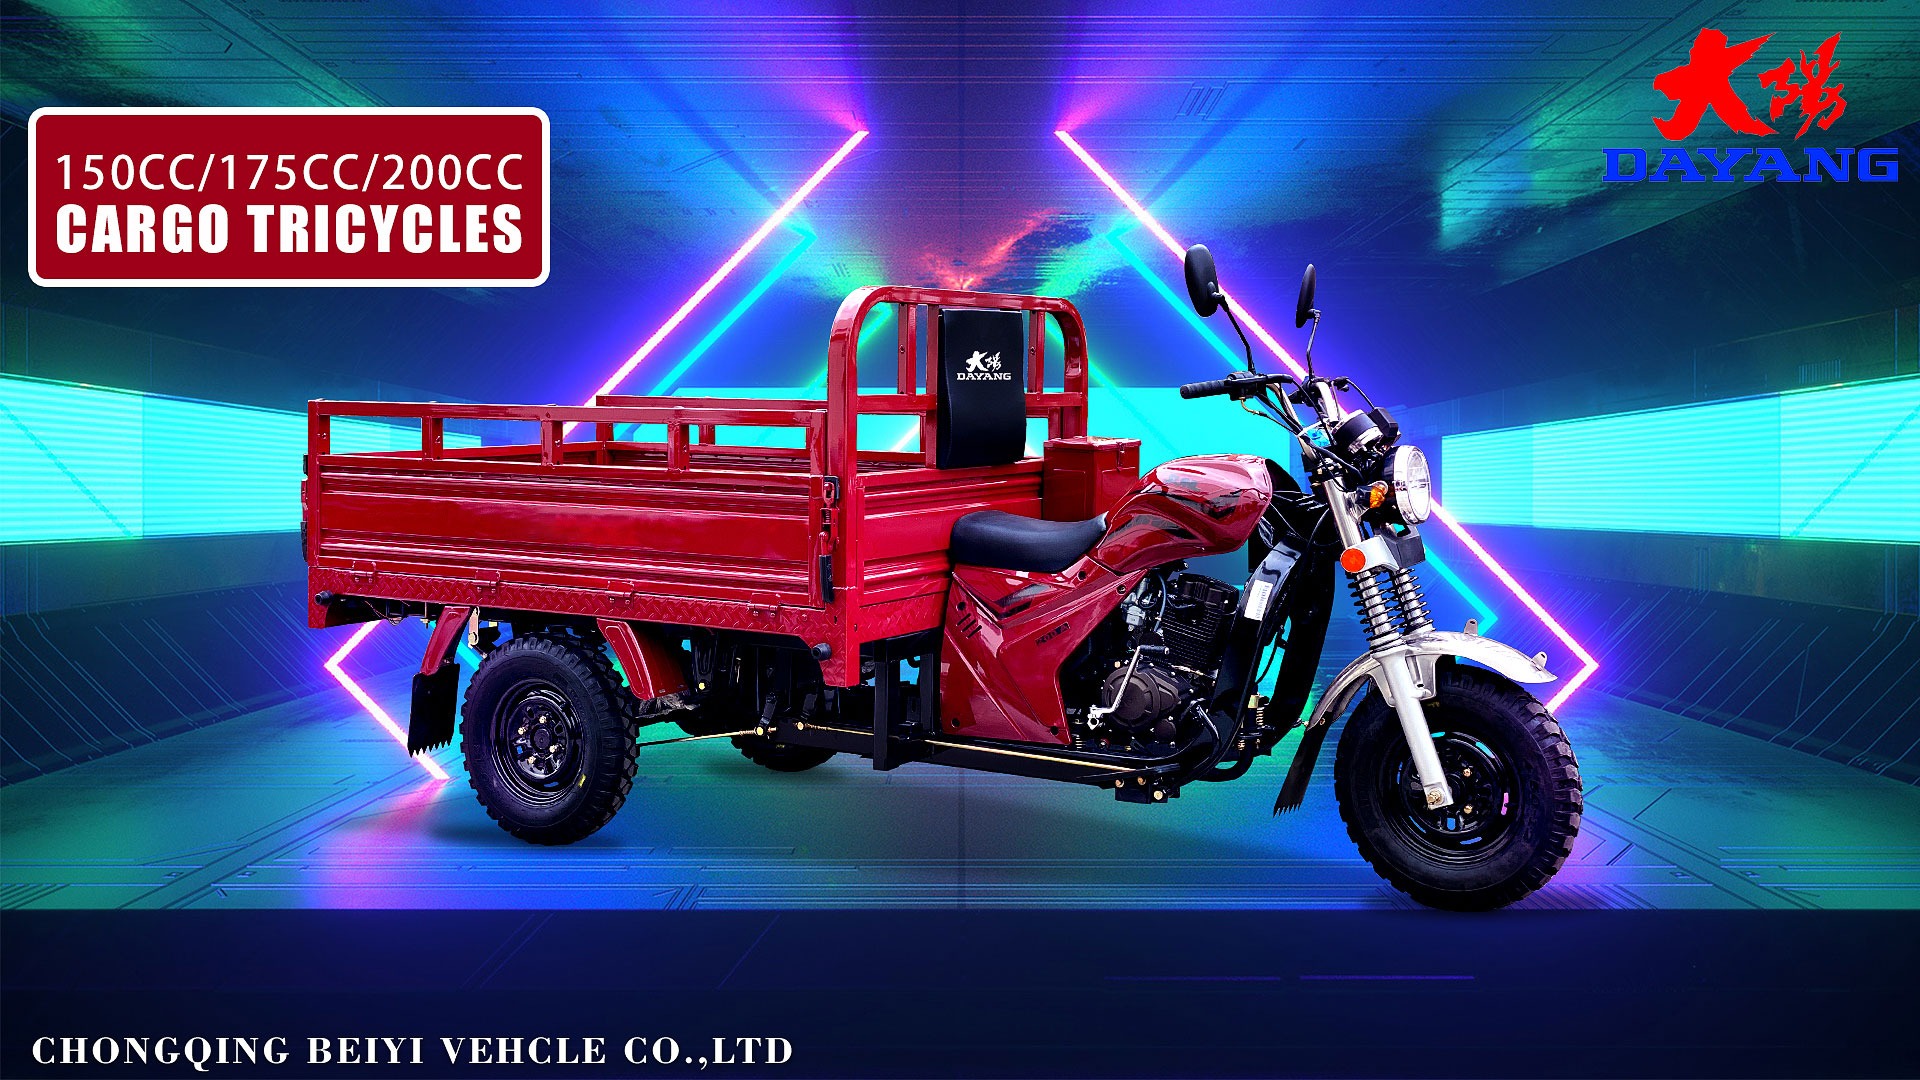 Brand well sell Quality classical light loading truck cargo  Motorized Cargo Tricycle 3 Wheel Motorcycle150CC/175CC/200CC